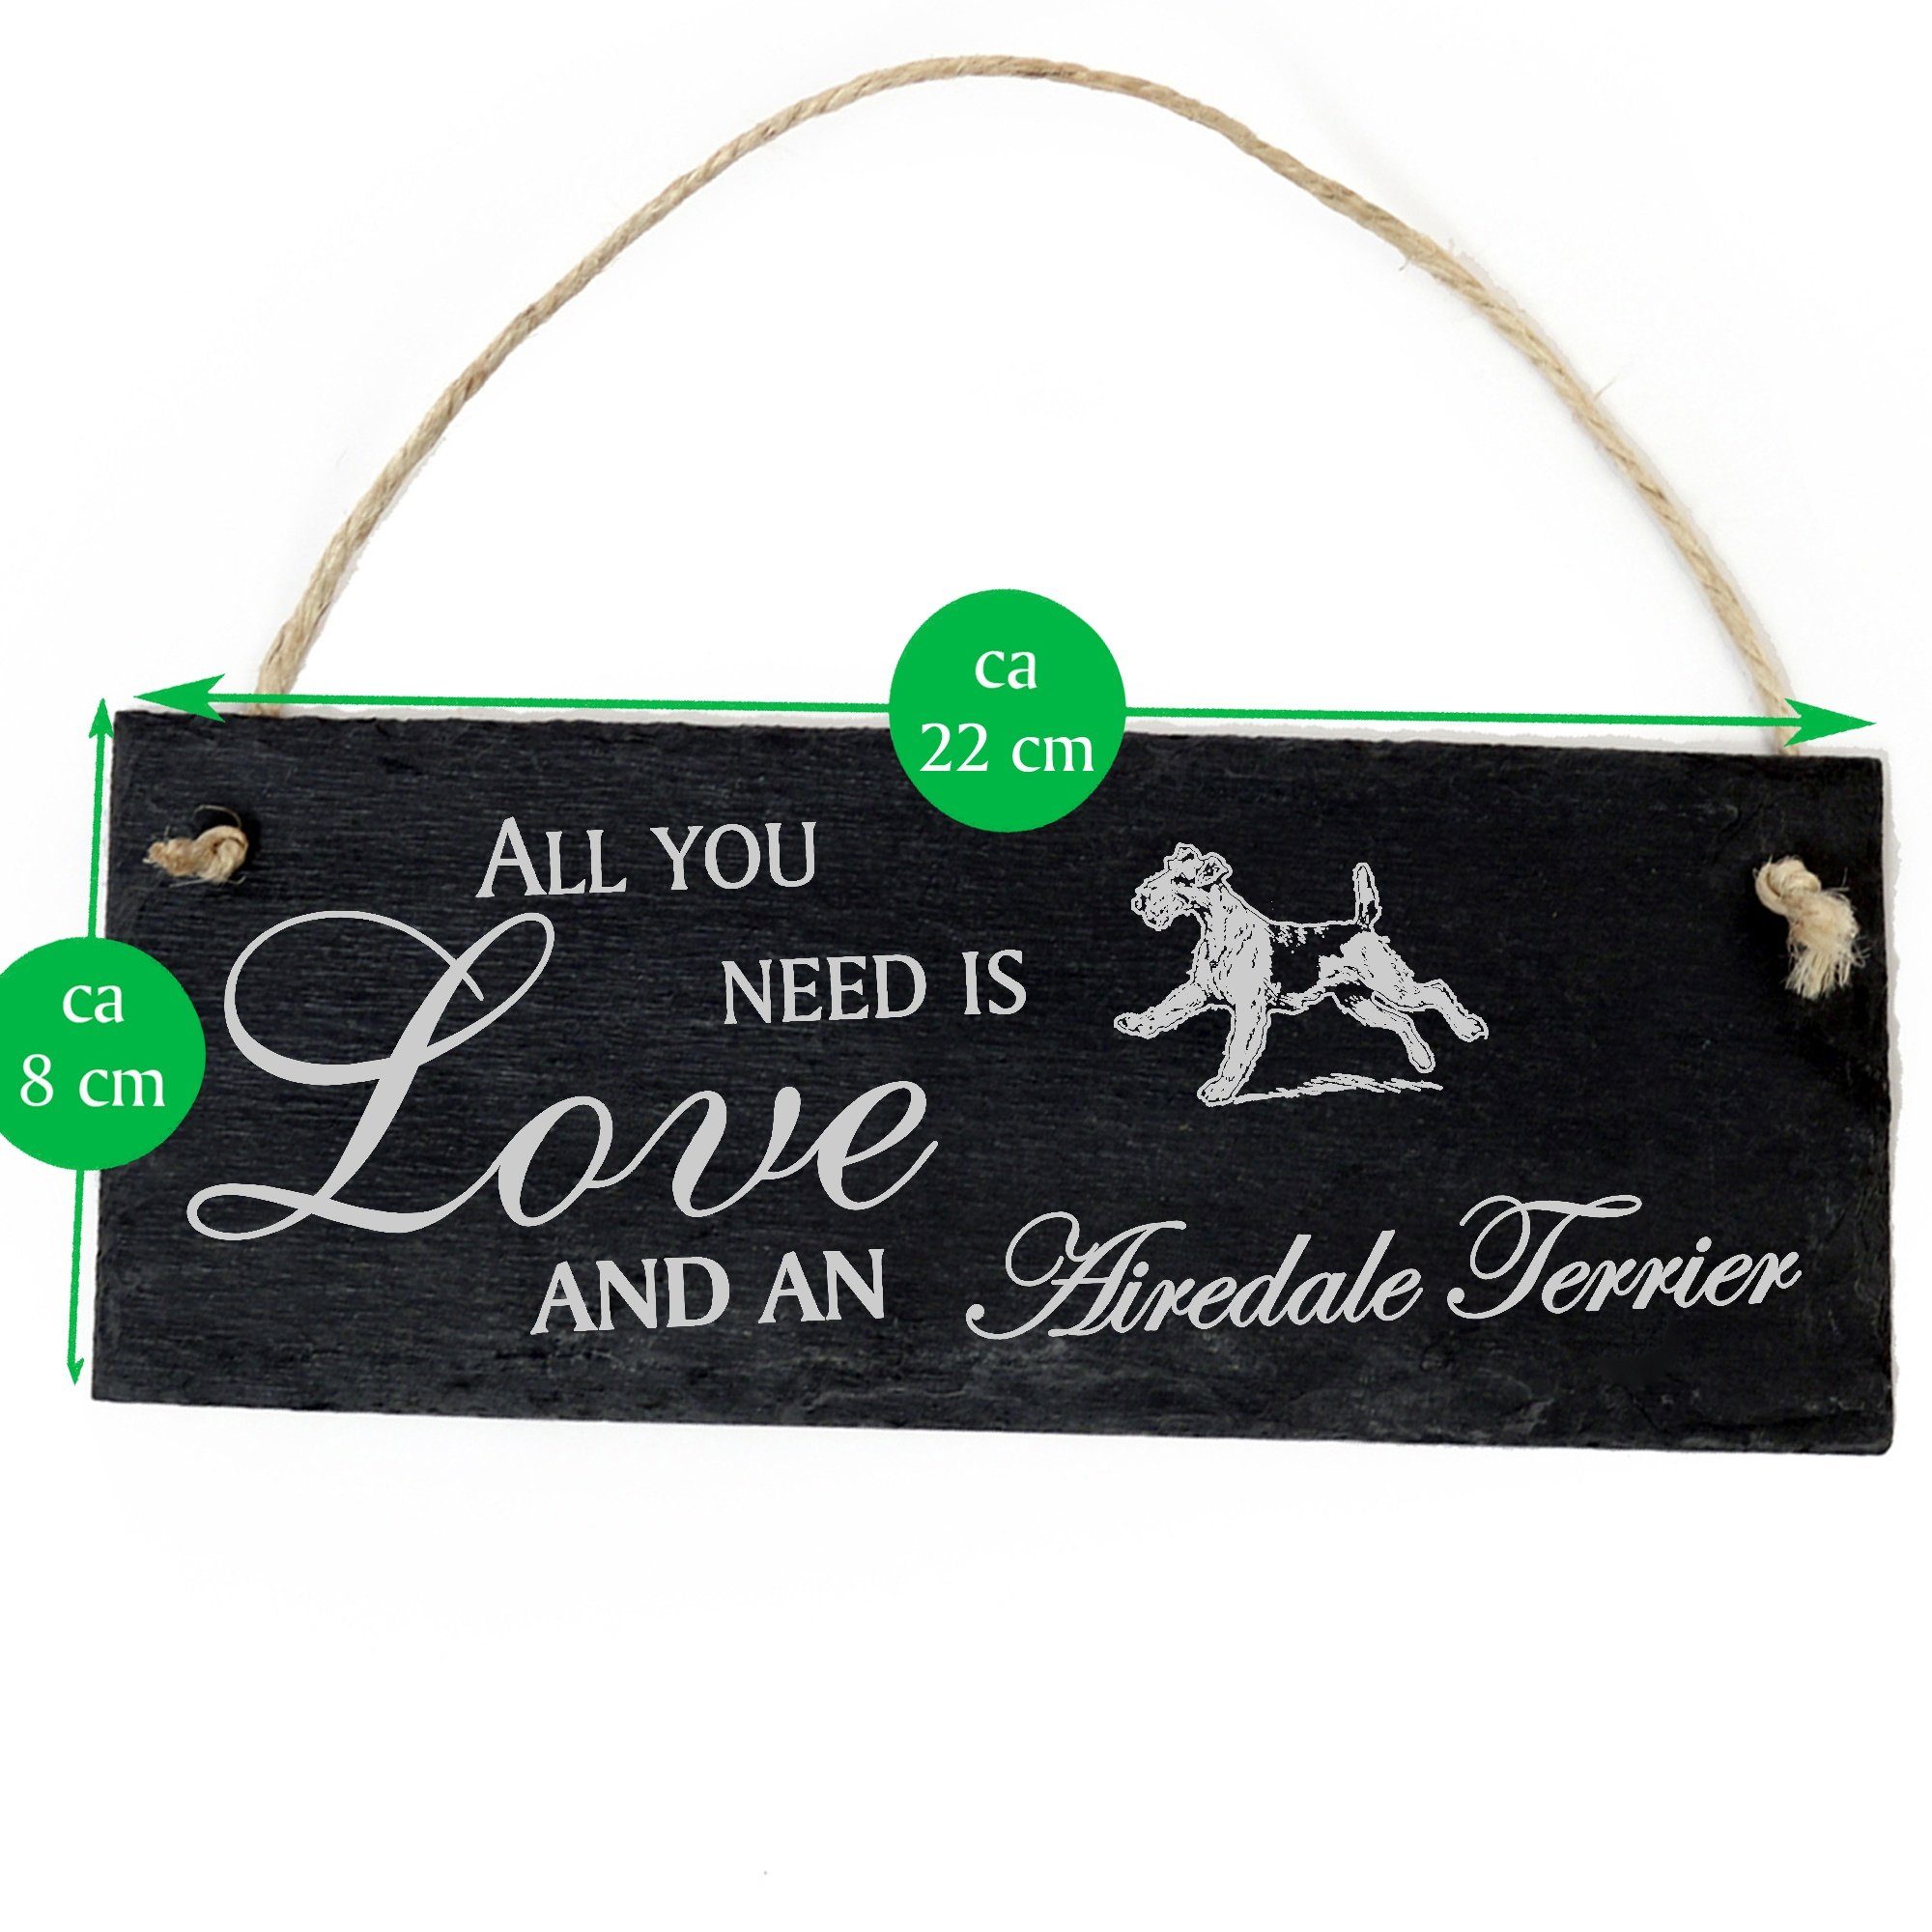 Dekolando Hängedekoration need Airedale Terrier you Terrier 22x8cm All is Airedale an Love and